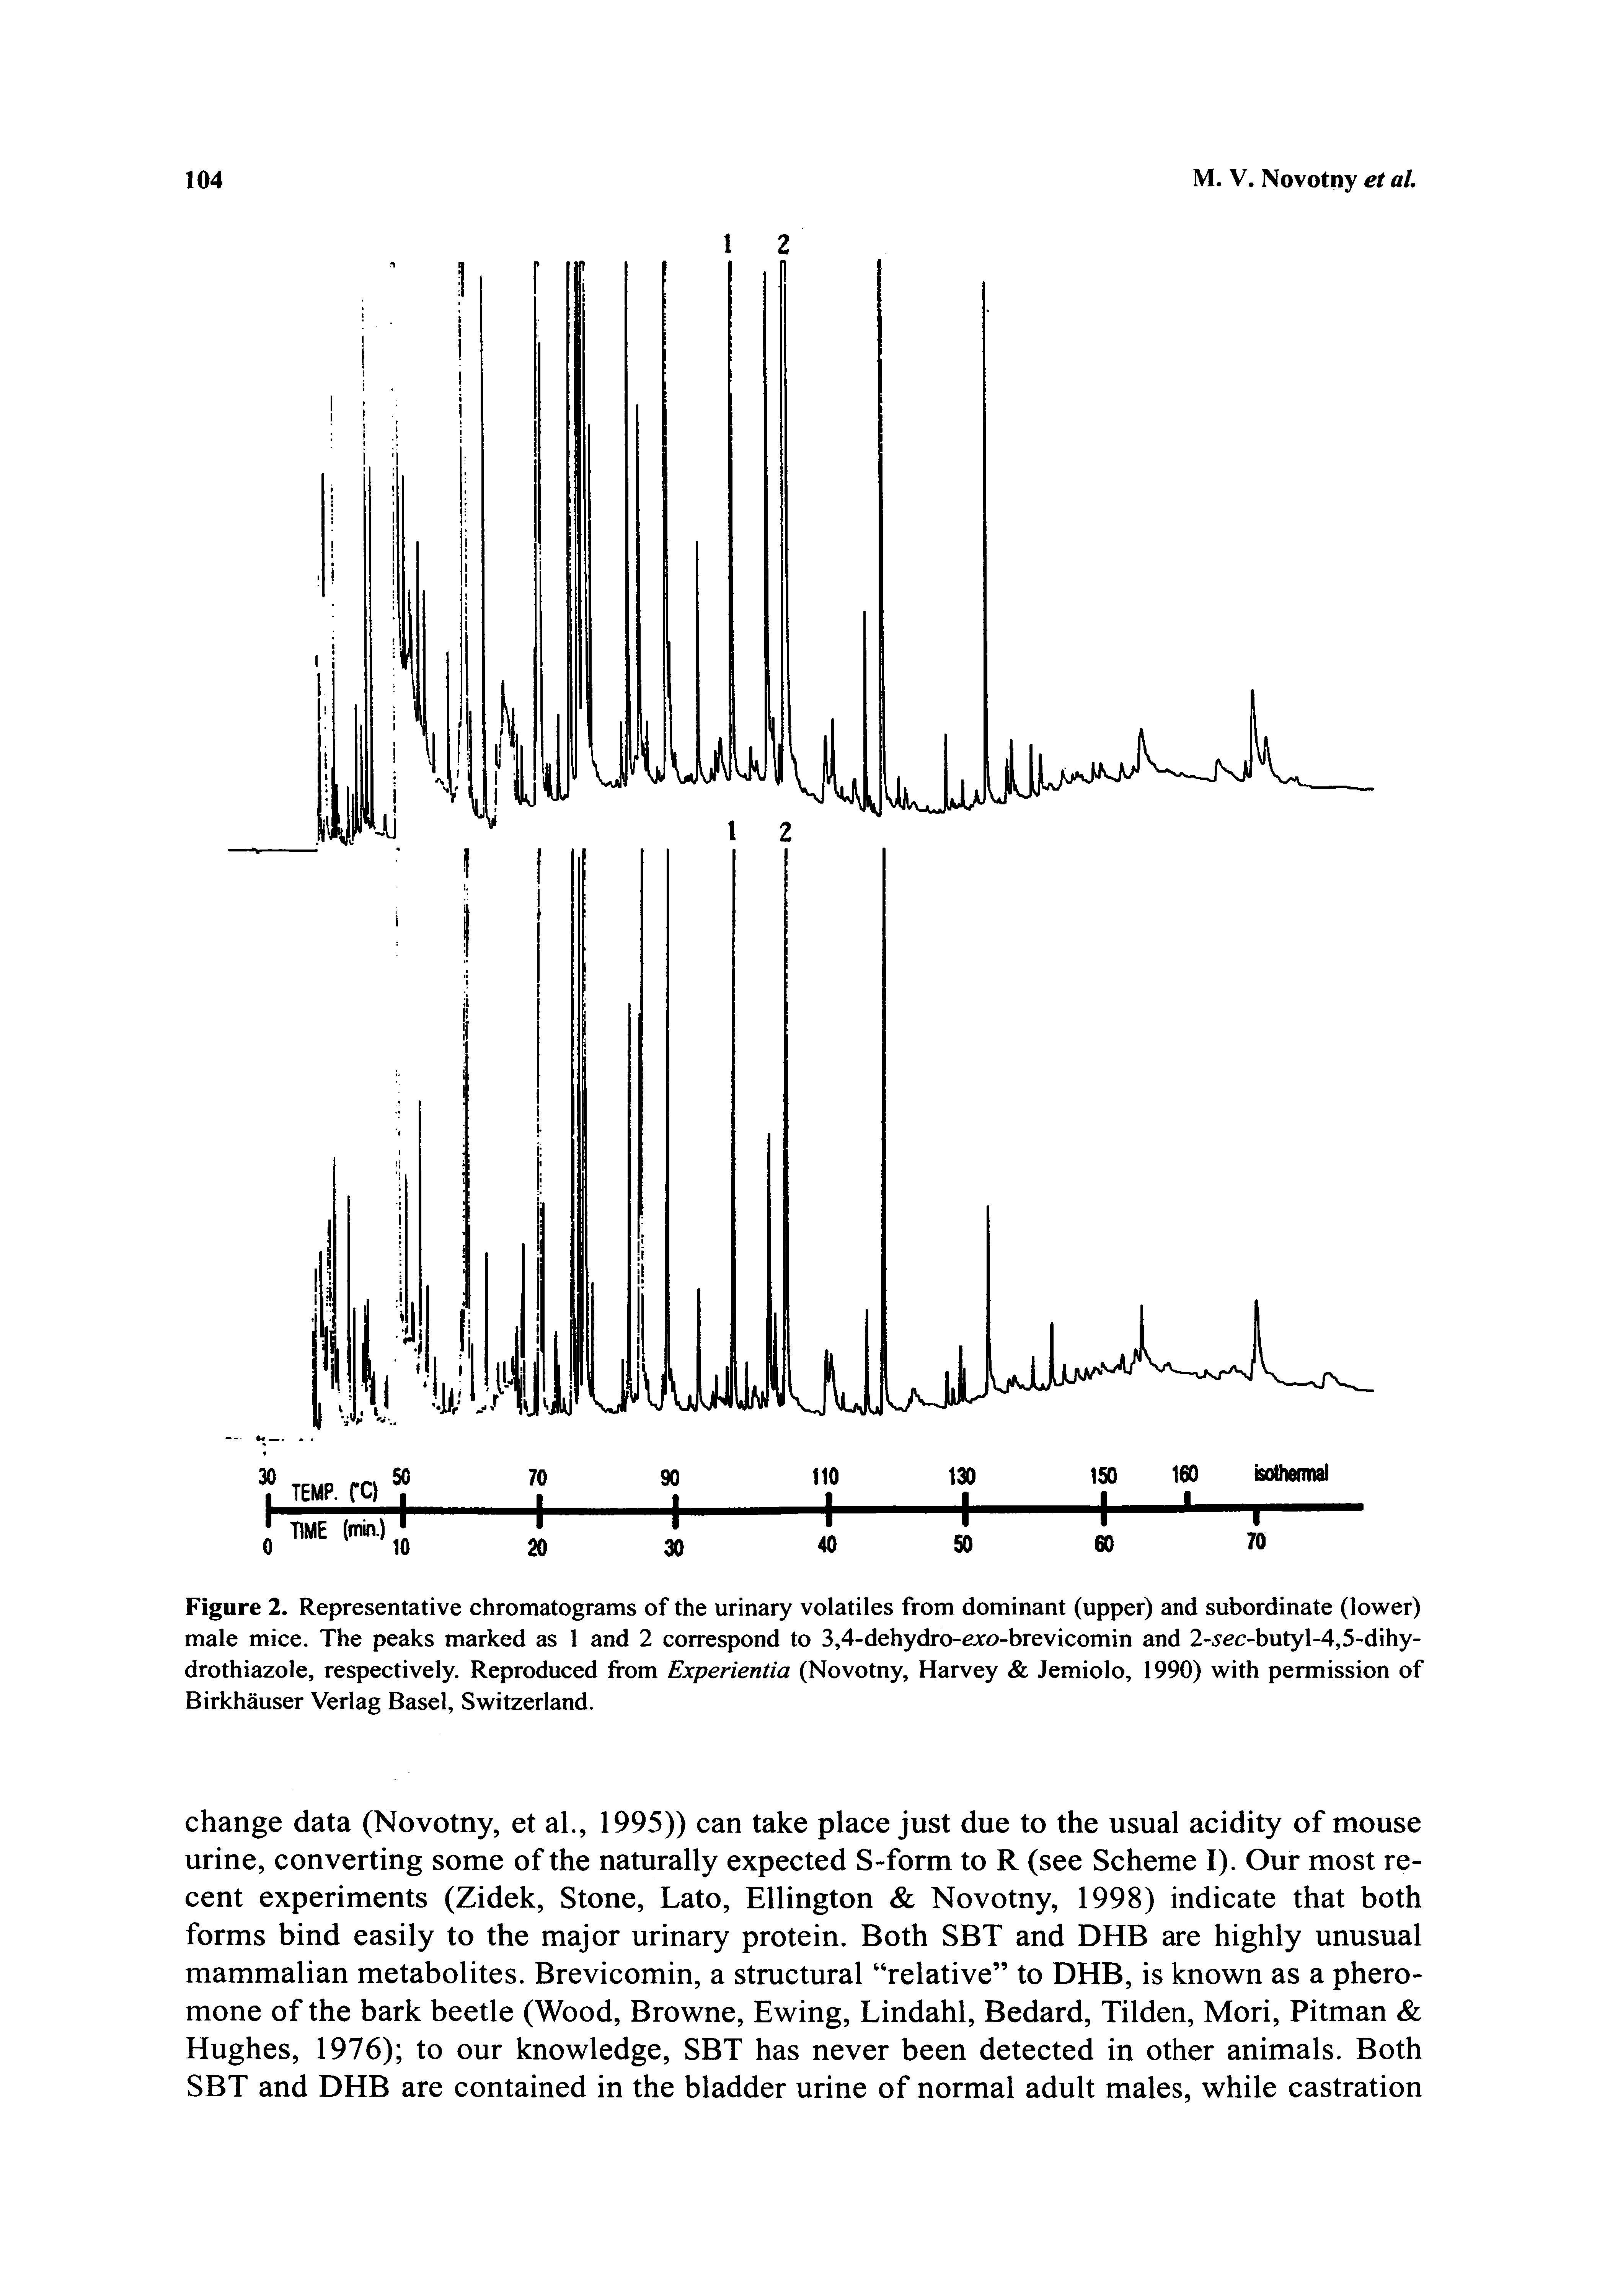 Figure 2. Representative chromatograms of the urinary volatiles from dominant (upper) and subordinate (lower) male mice. The peaks marked as 1 and 2 correspond to 3,4-dehydro-cxo-brevicomin and 2-.yec-butyl-4,5-dihy-drothiazole, respectively. Reproduced from Experientia (Novotny, Harvey Jemiolo, 1990) with permission of Birkhauser Verlag Basel, Switzerland.